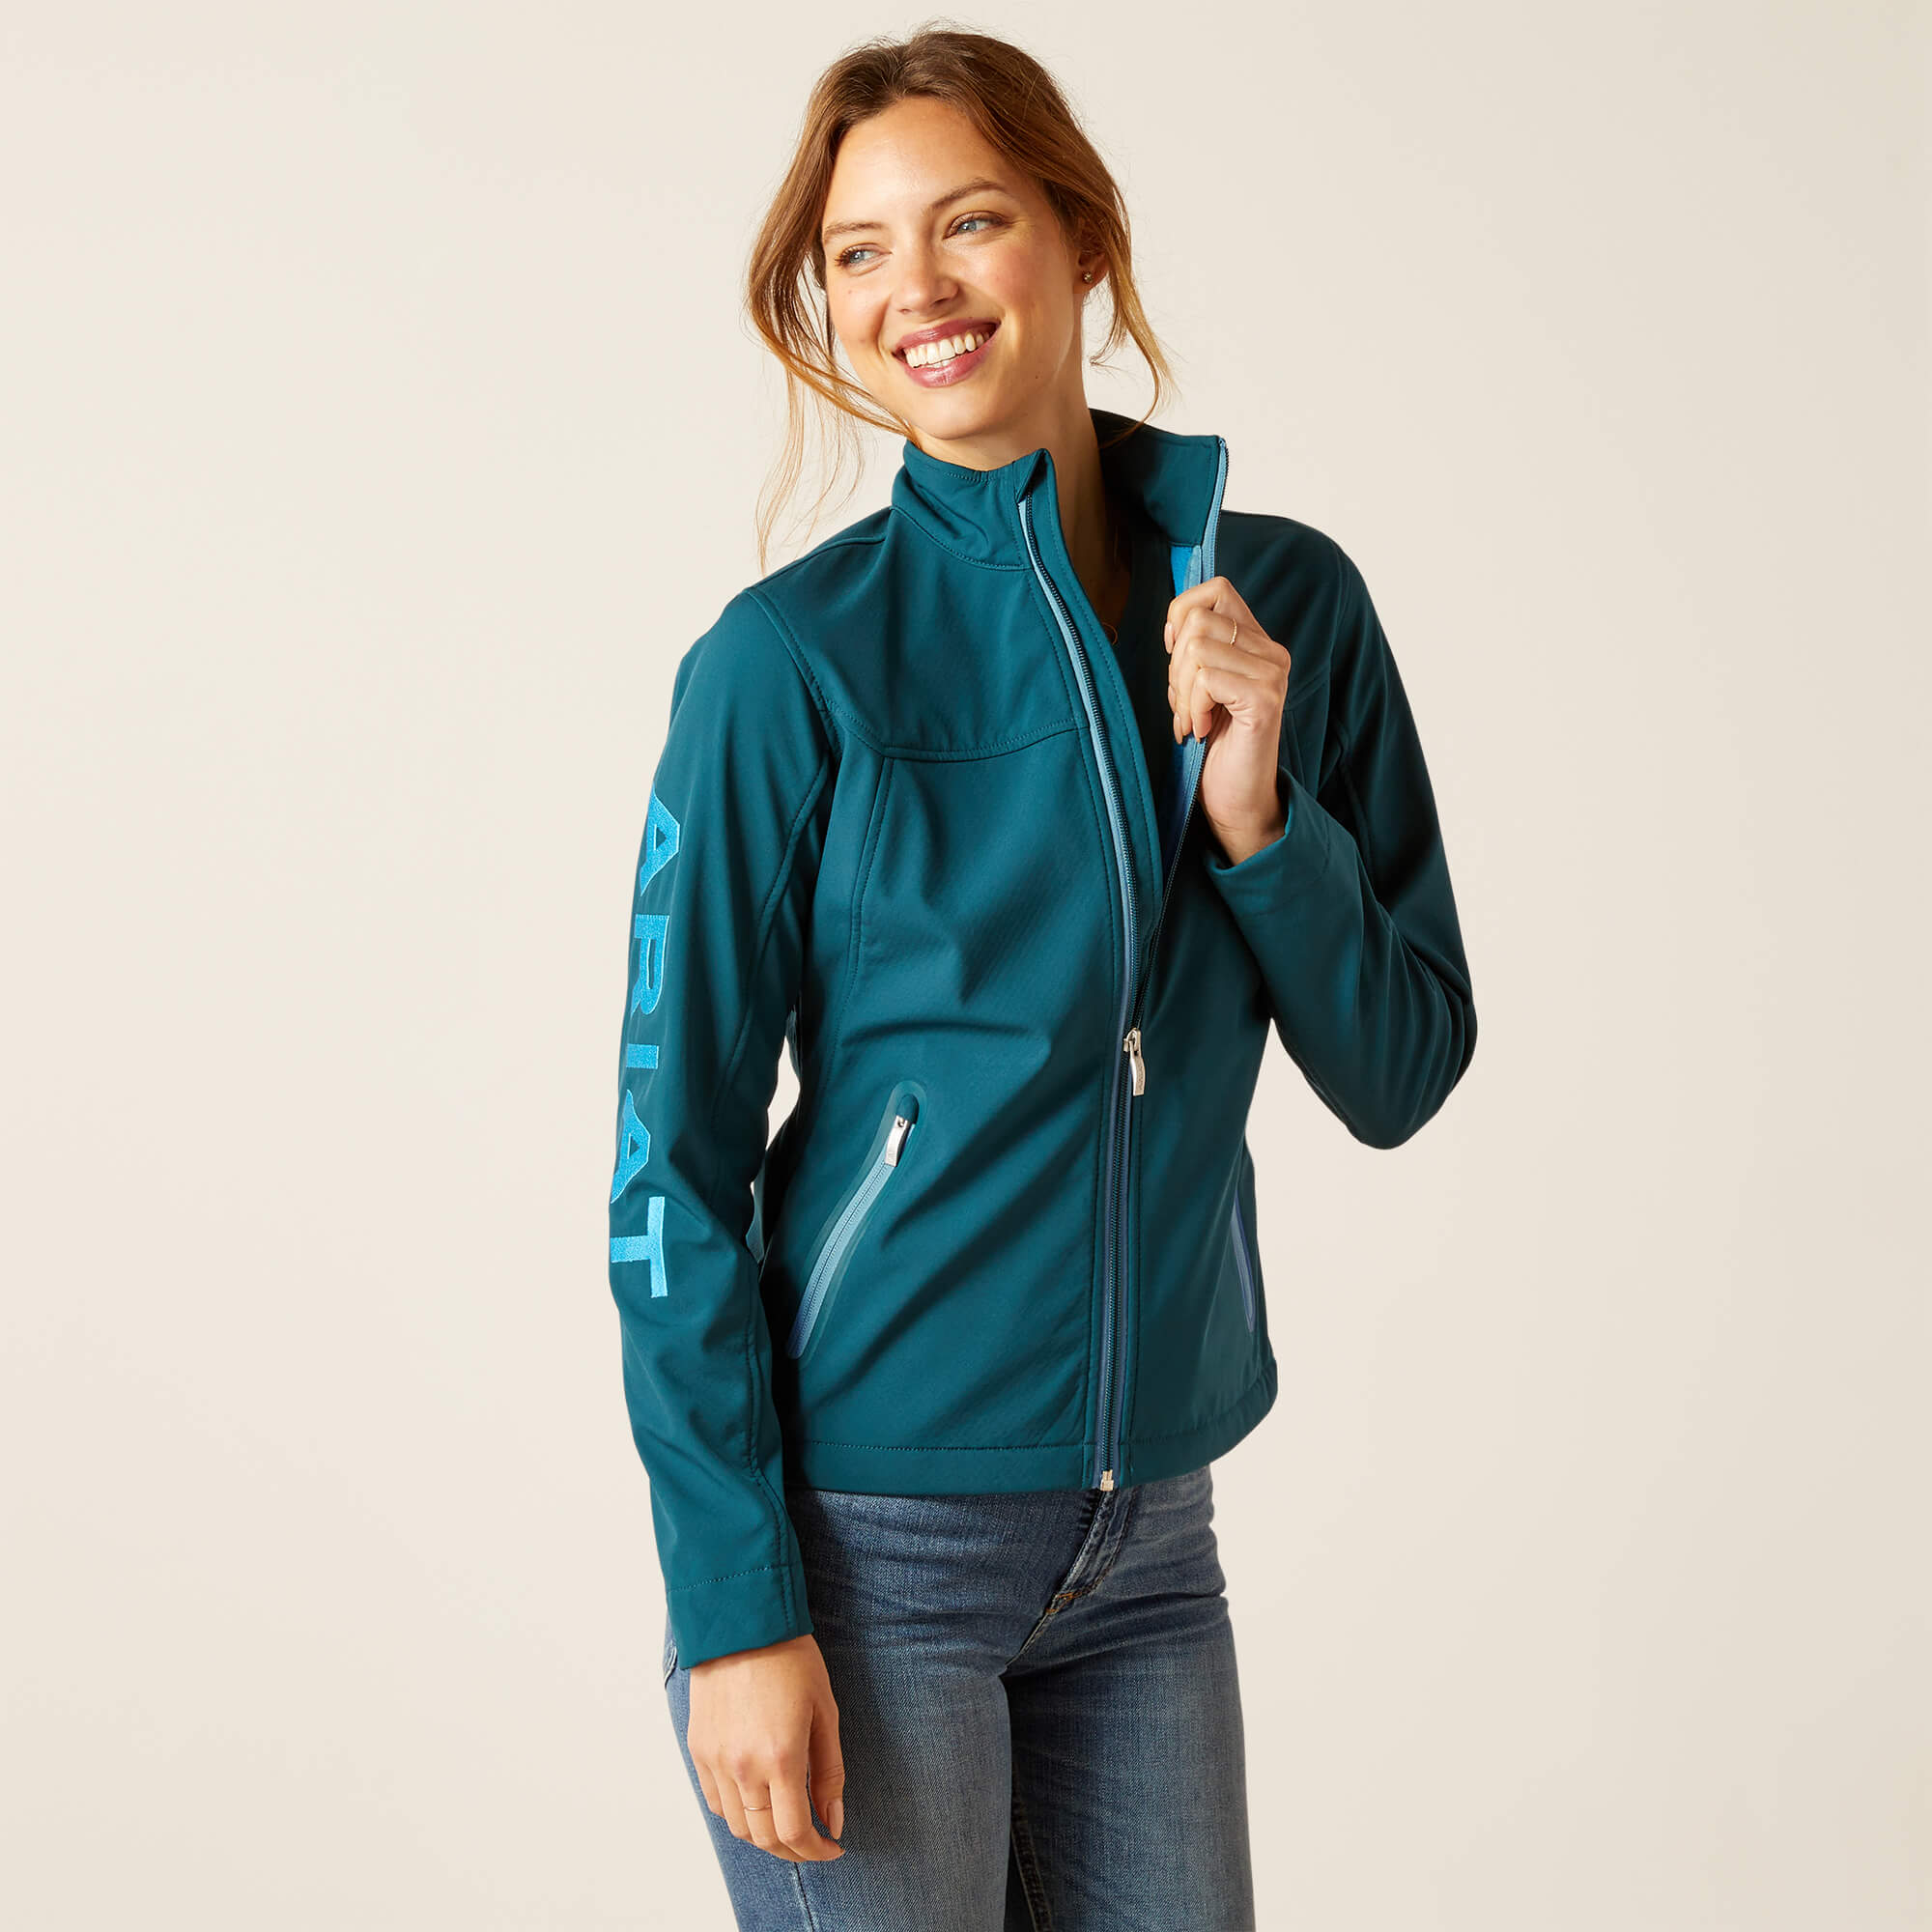 Ariat New Team Softshell Jacket for Ladies